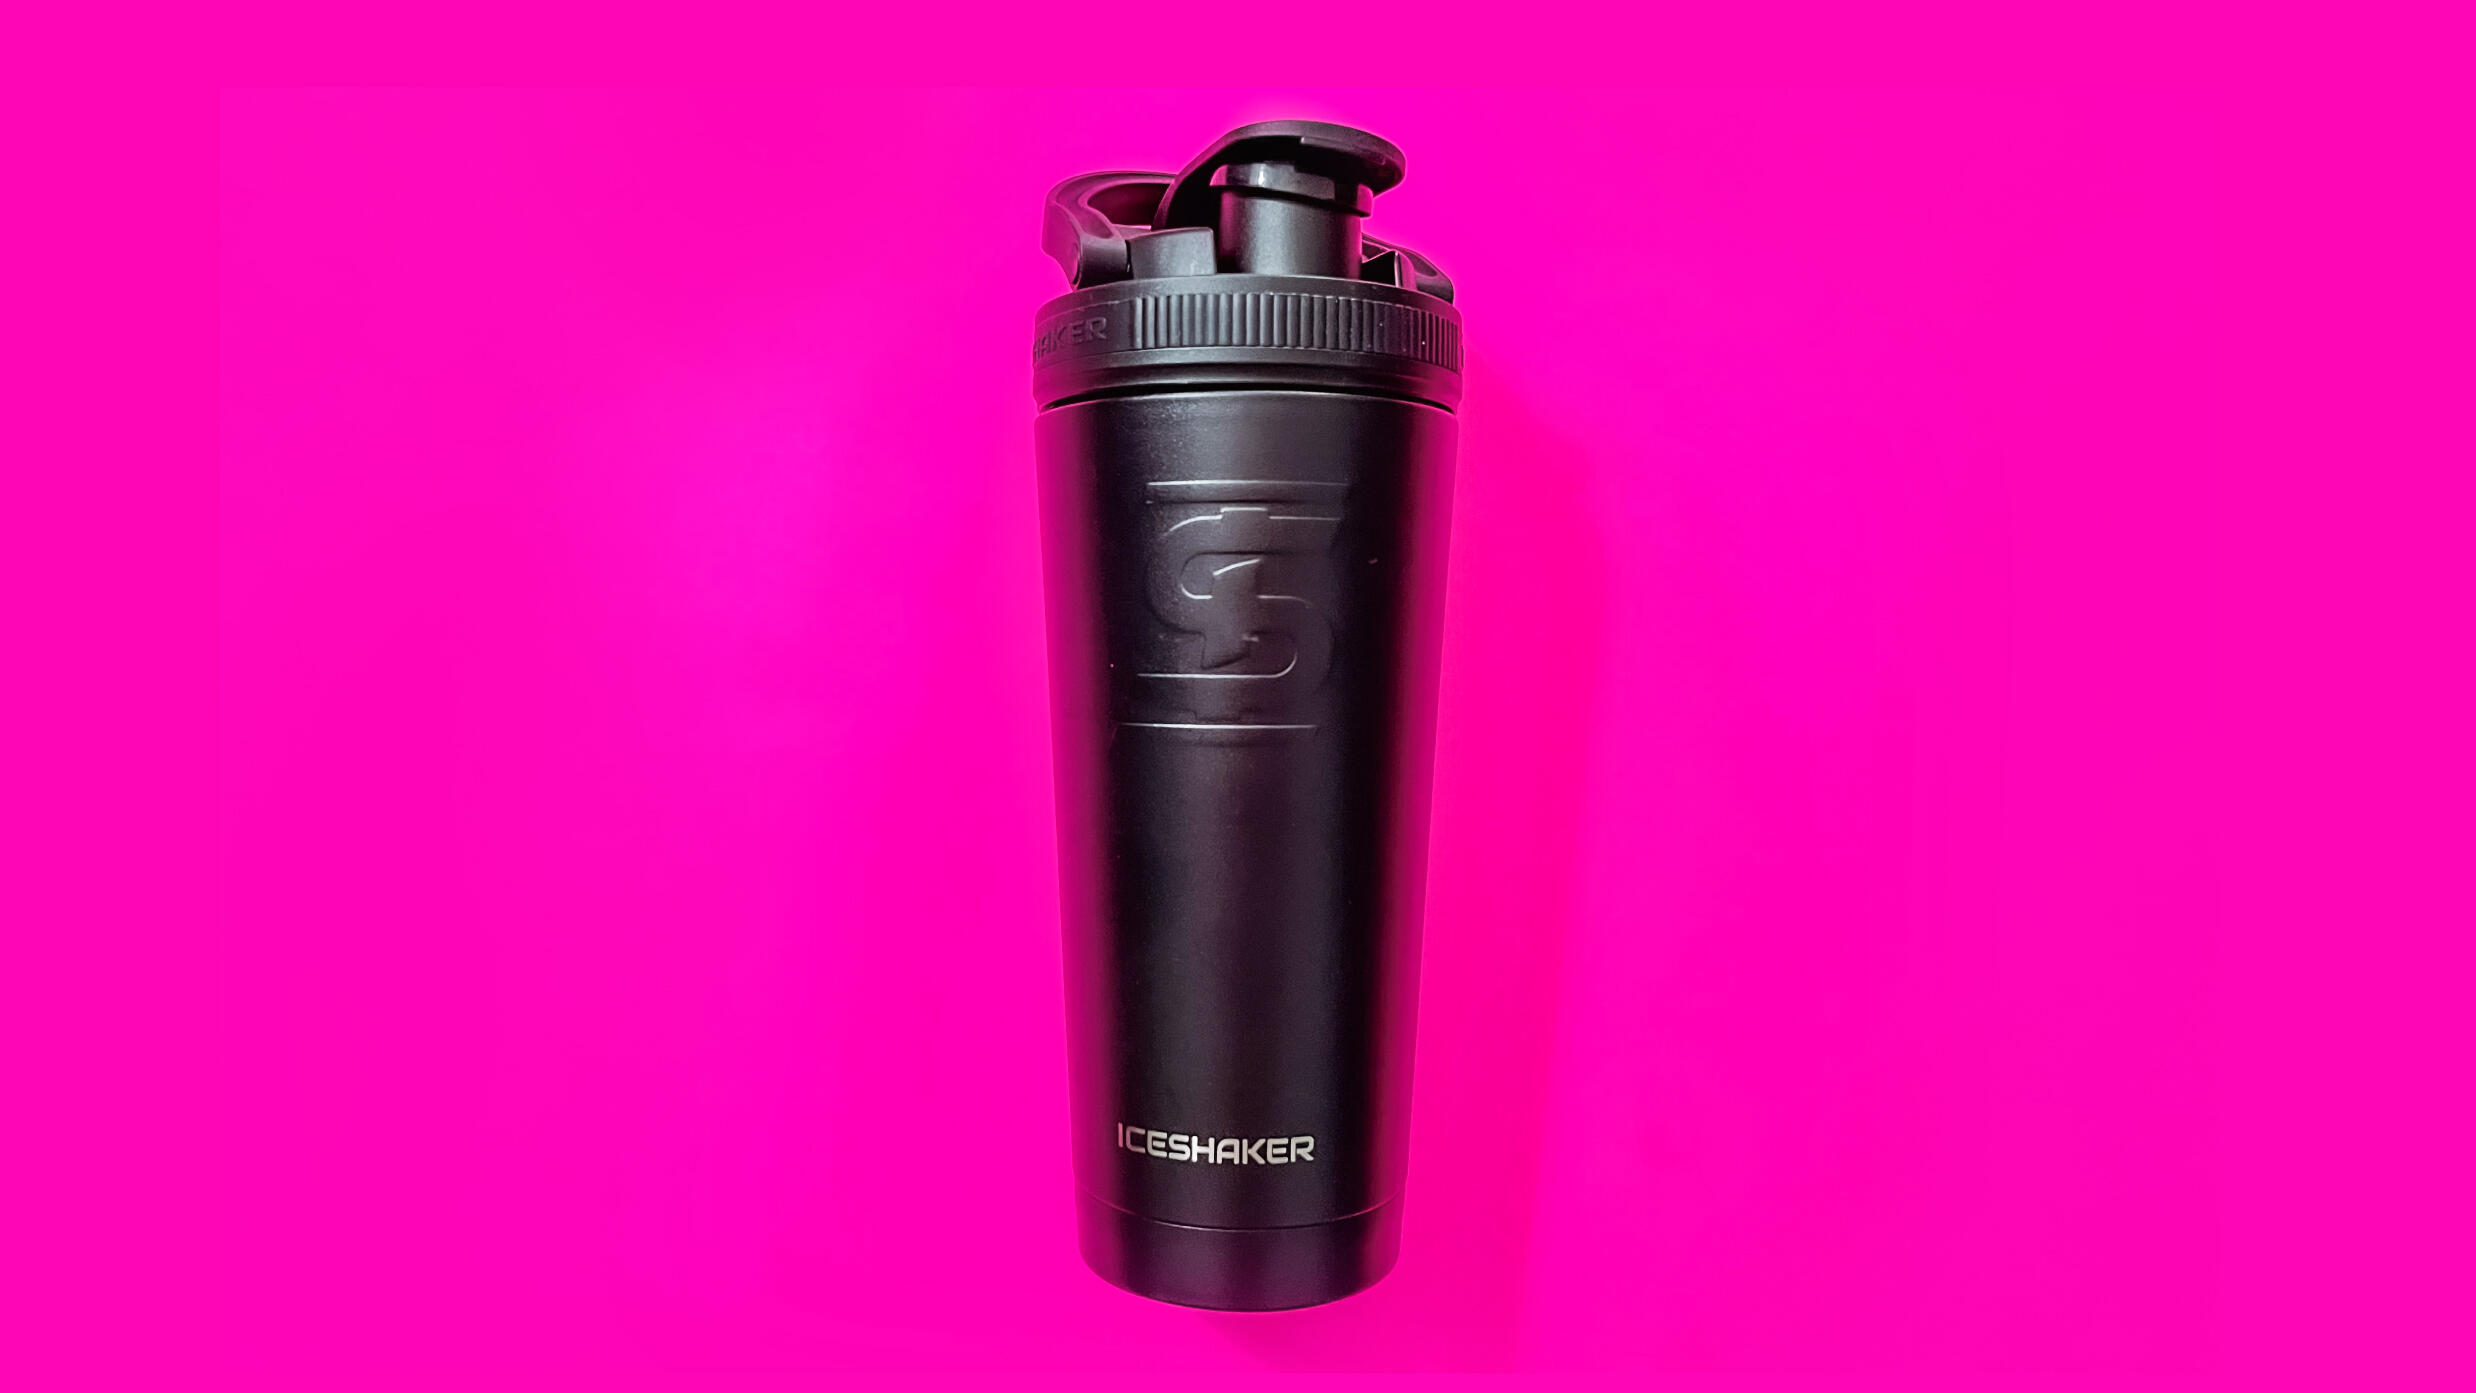 TureClos Electric Shaker for Protein Powder Gym Workout Fitness